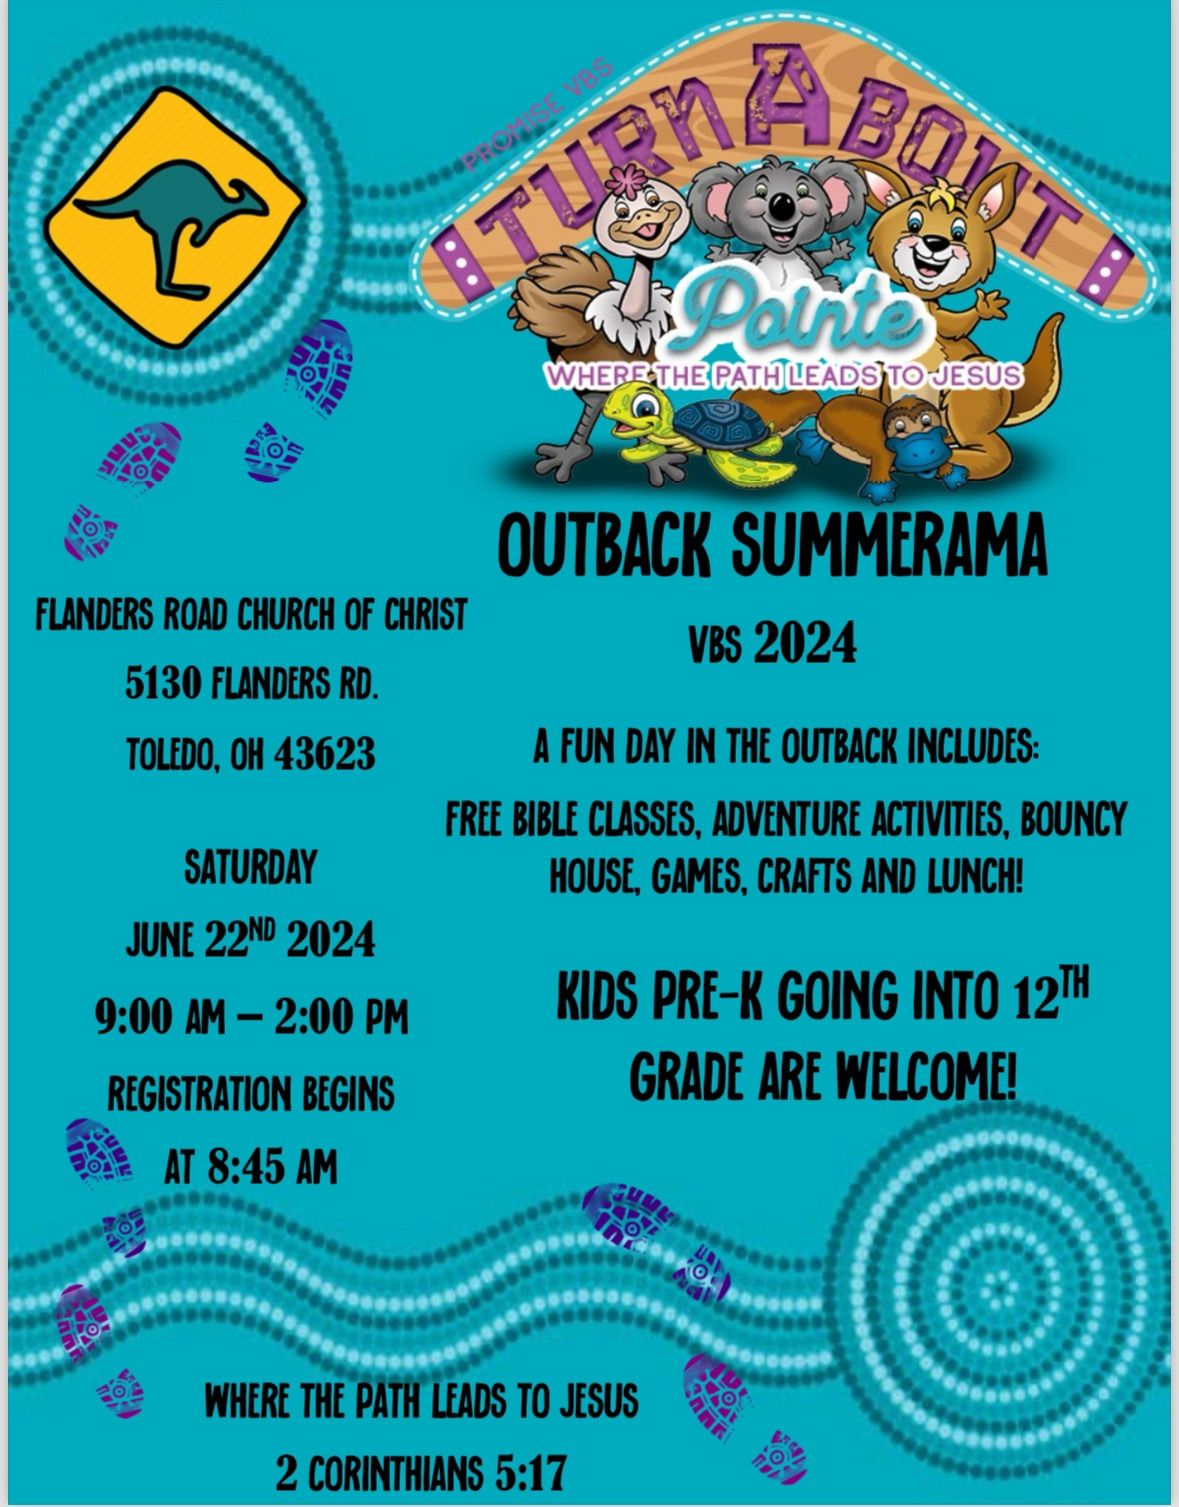 OUTBACK SUMMERAMA- VBS 2024